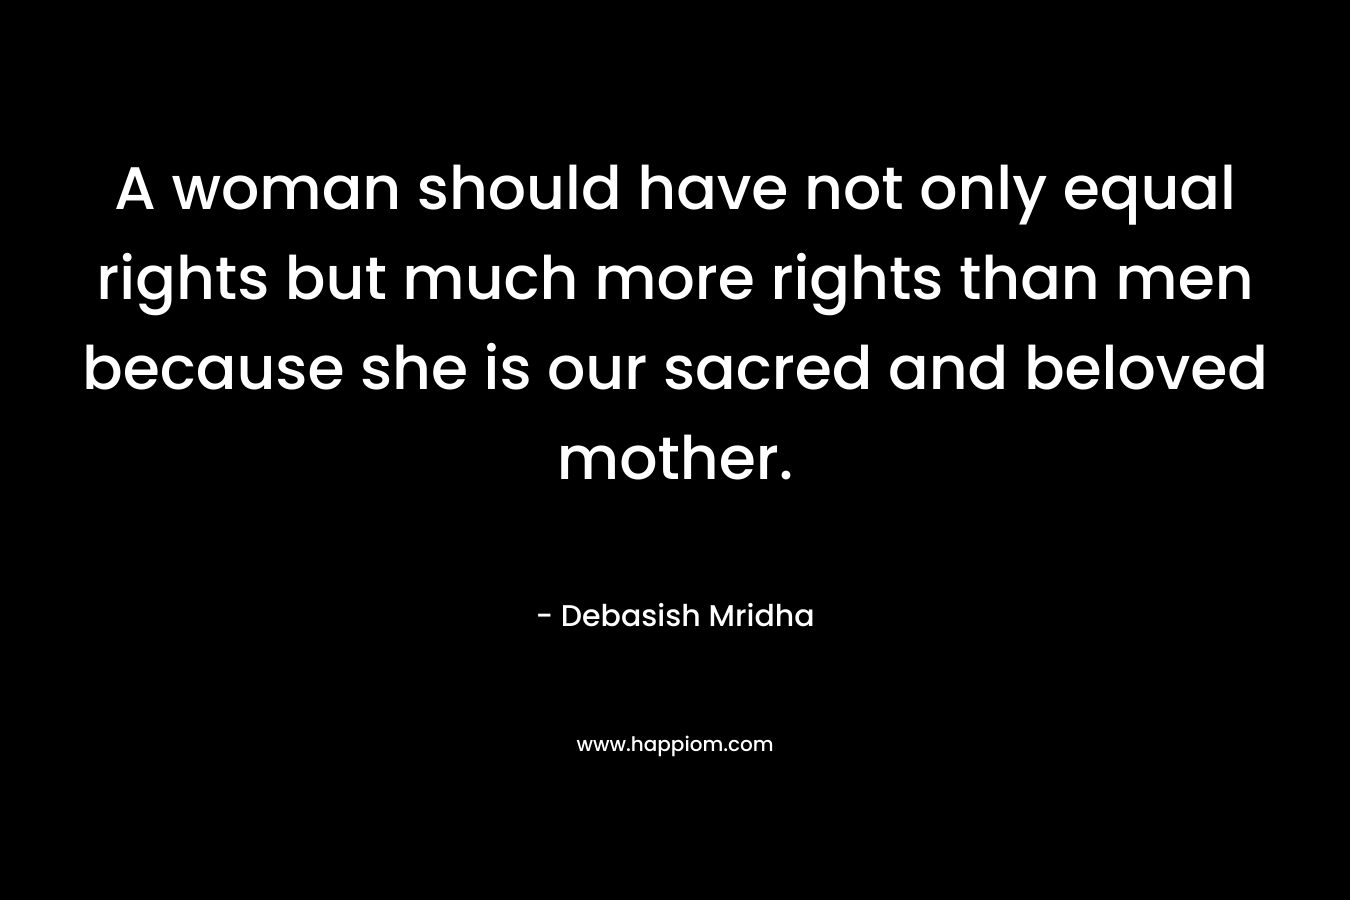 A woman should have not only equal rights but much more rights than men because she is our sacred and beloved mother. – Debasish Mridha